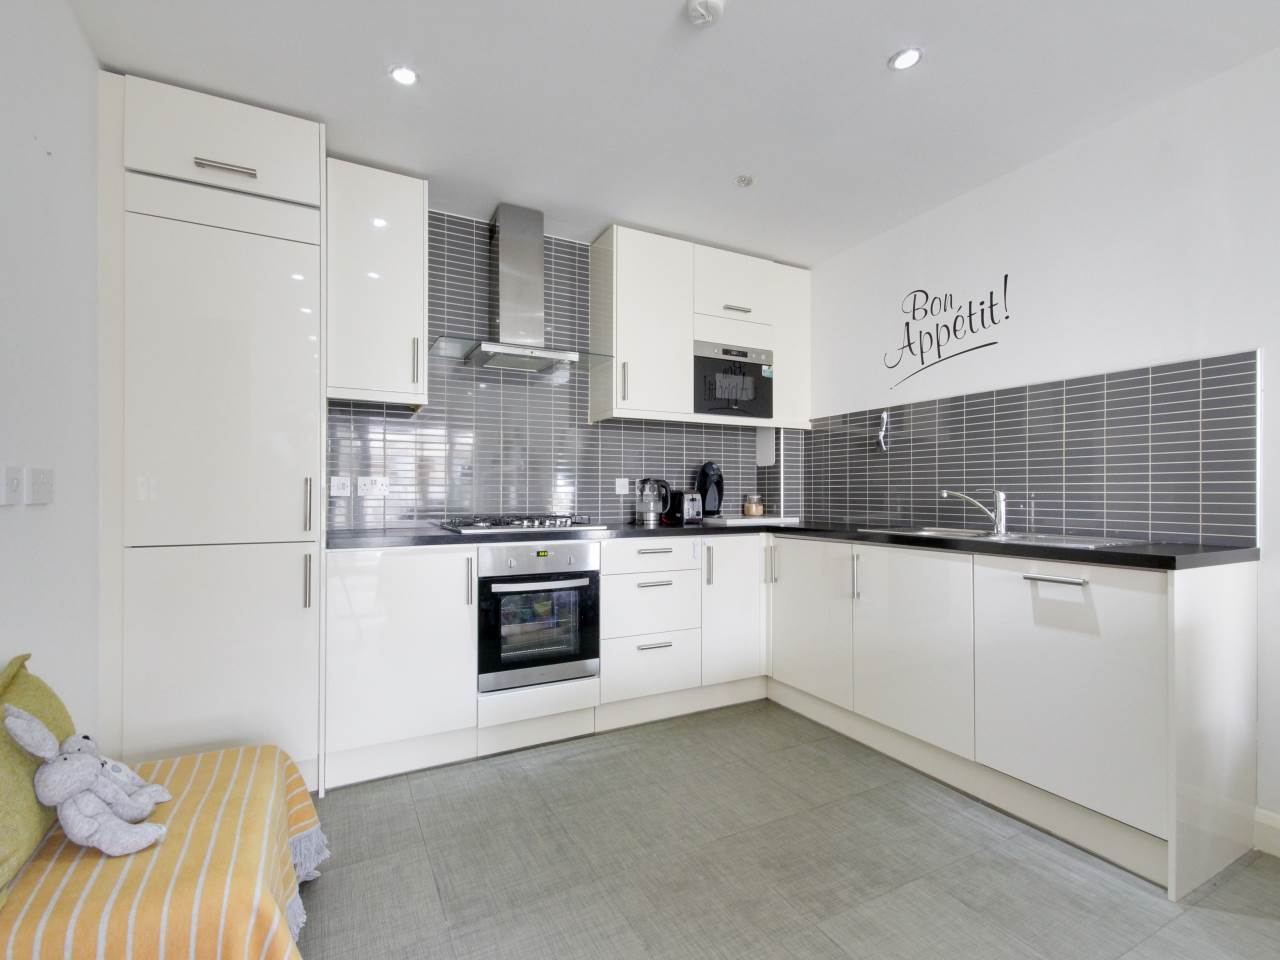 2 bed flat for sale in Wanti Terrace, Chigwell - Property Image 1